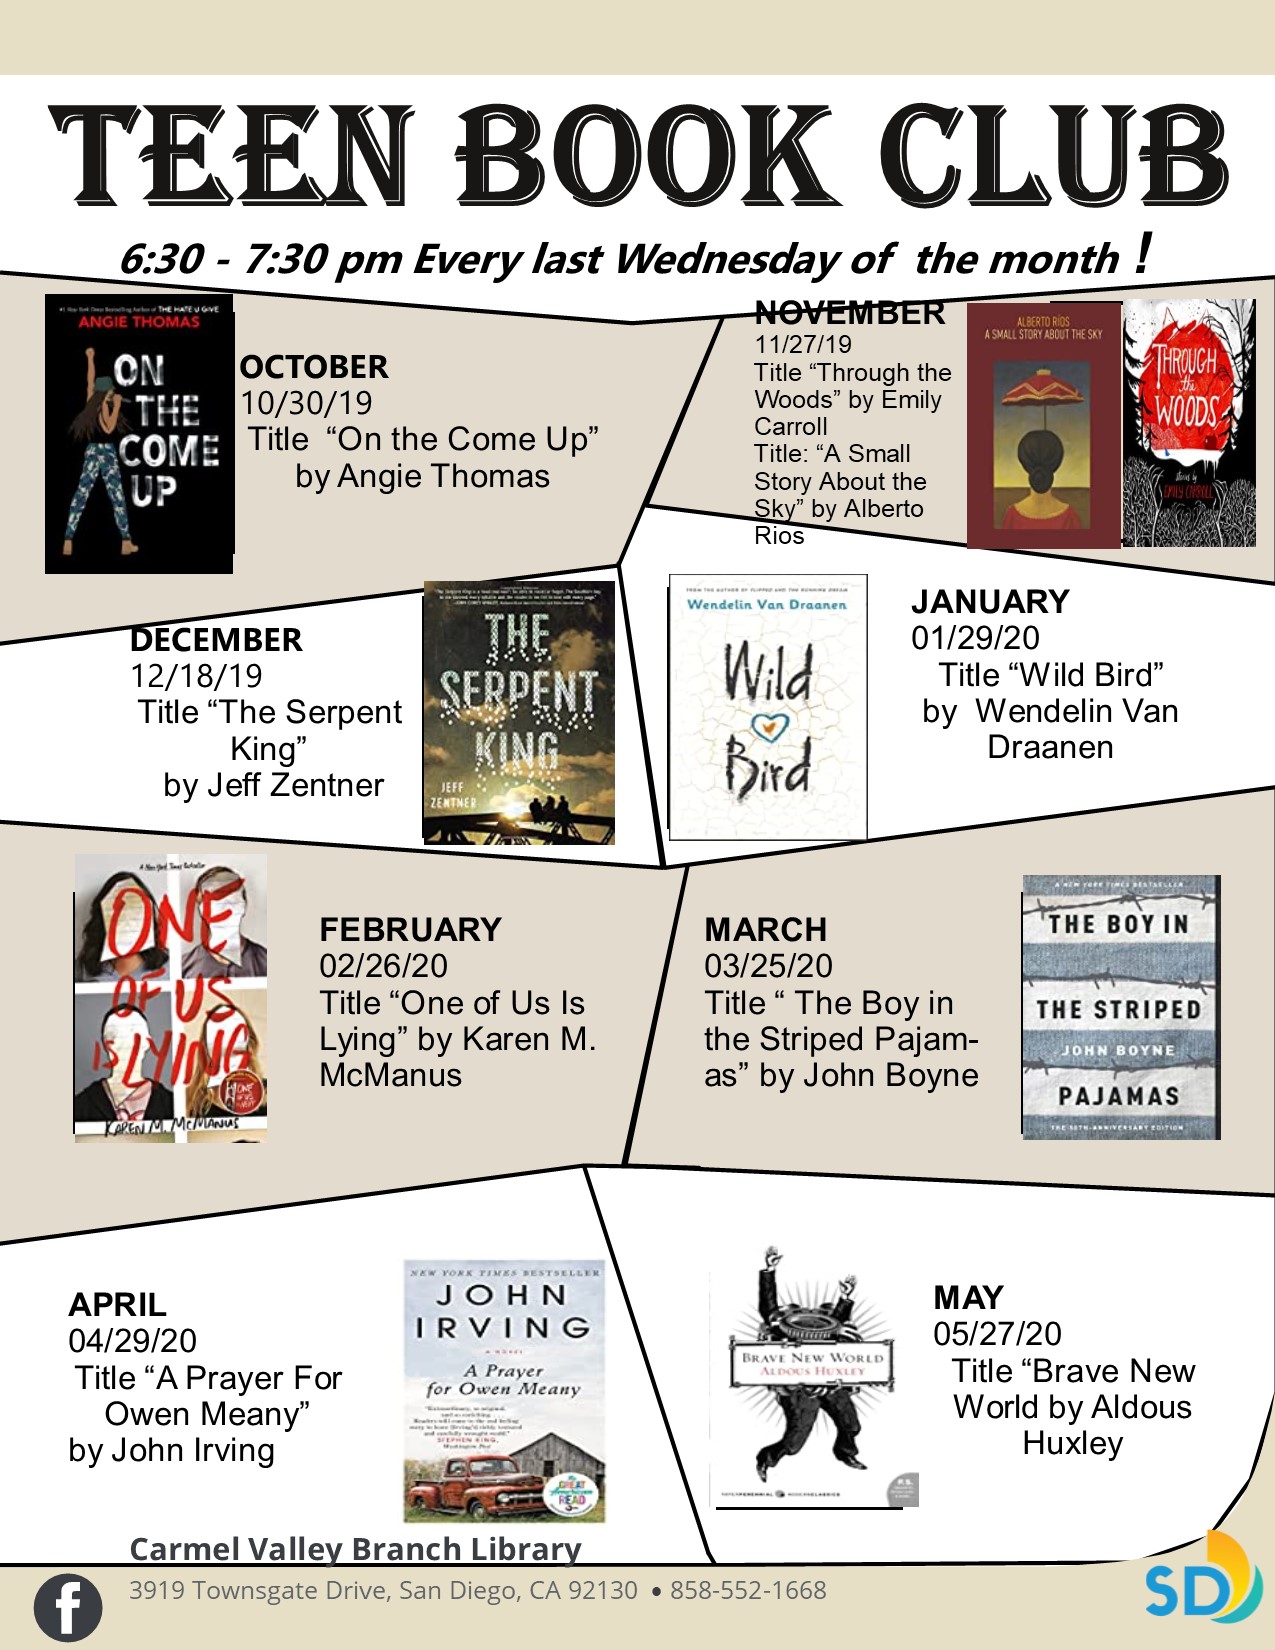 Photo shows the upcoming teen book club selections